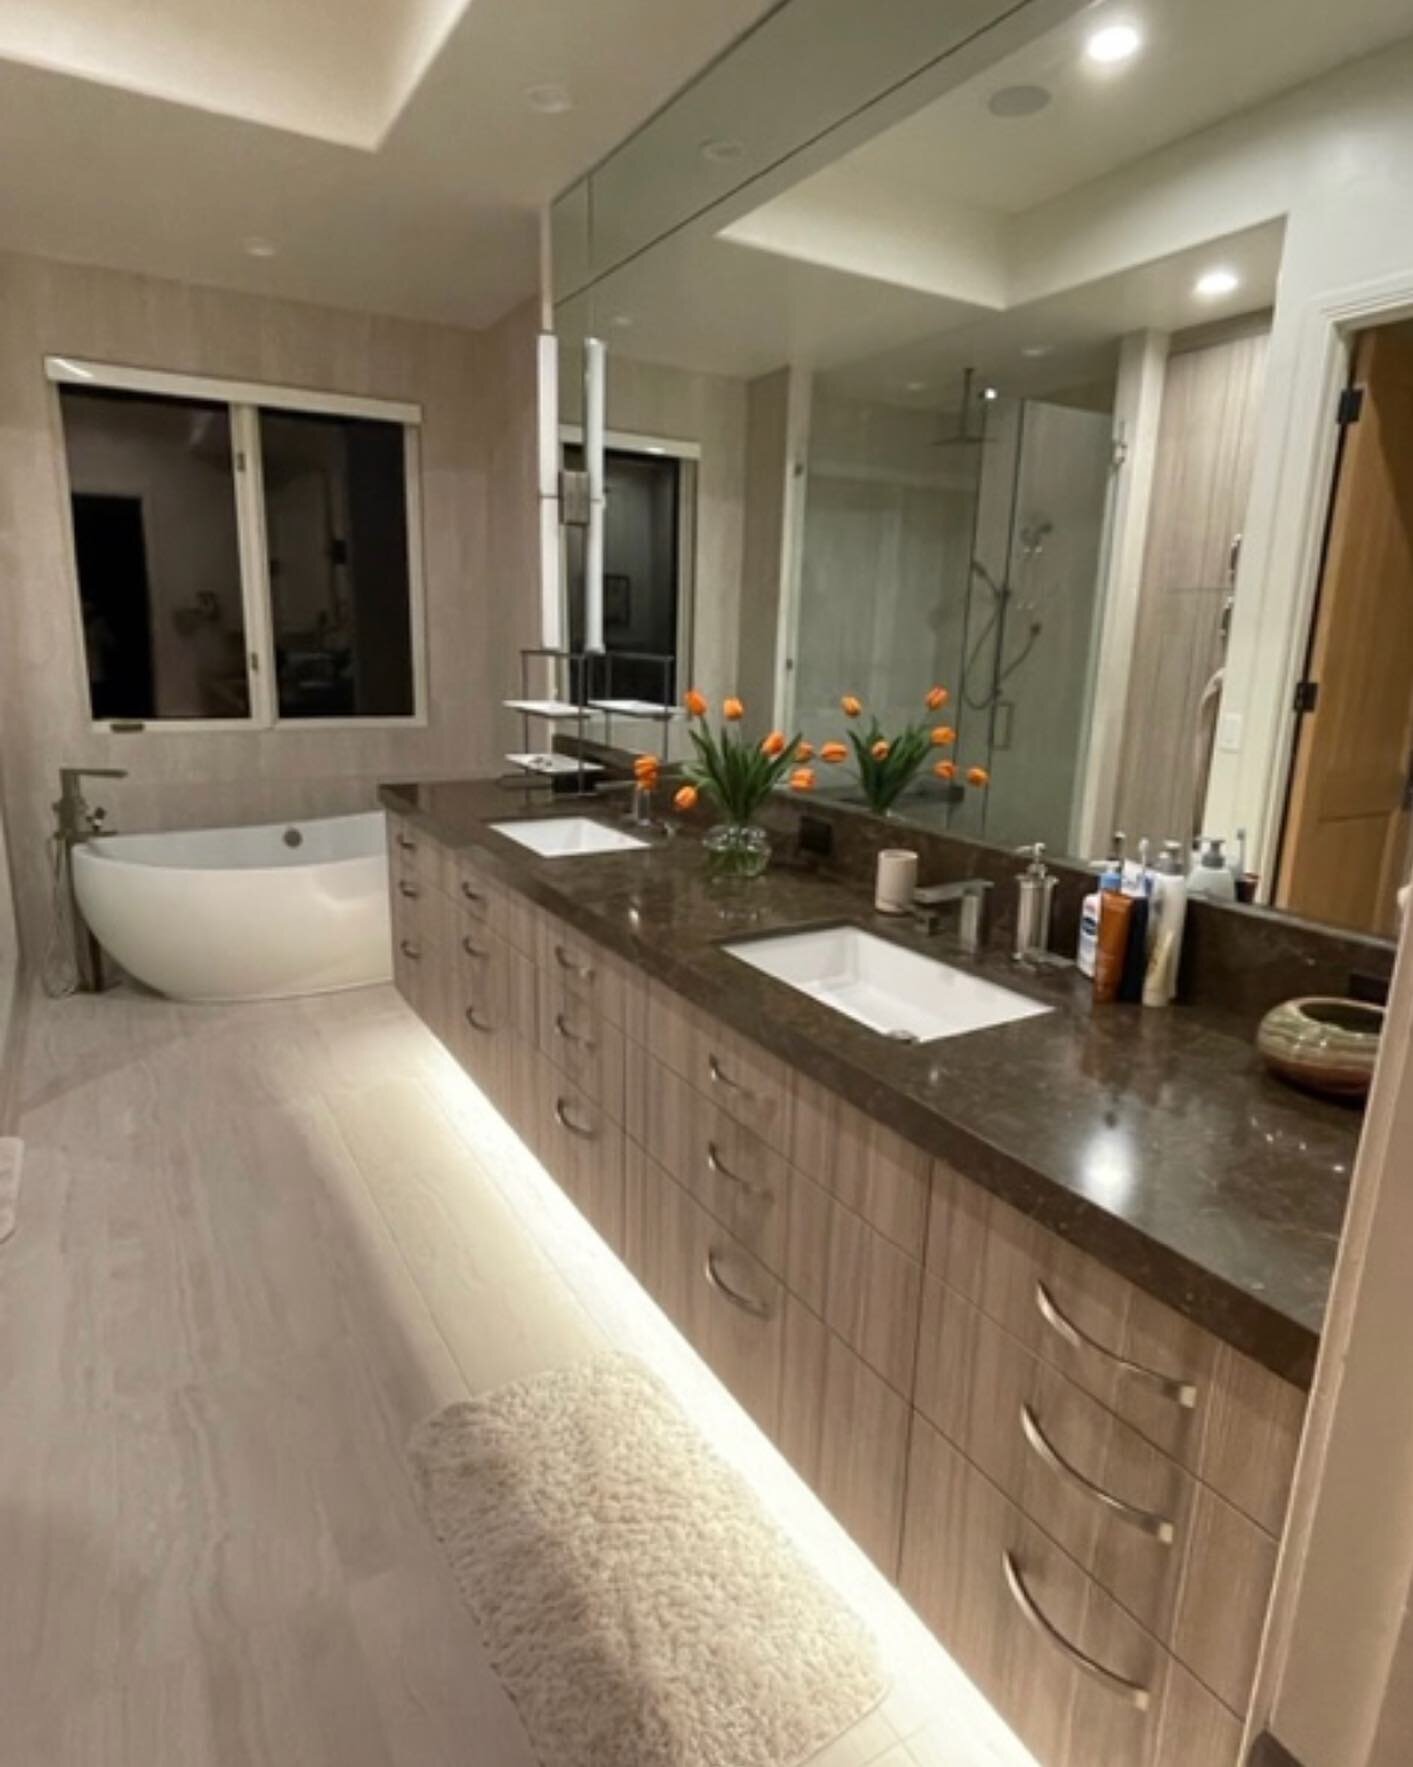 Love how the finishes in this bathroom turned out. []
[]
#deervalley #bhhsutah #evagents #homestaging #interiordesign #luxuryliving #luxurylivingparkcity
#luxuryhome#luxurystaging #luxurydesign #luxuryrealestate #mountainmodern #mountainliving #mount